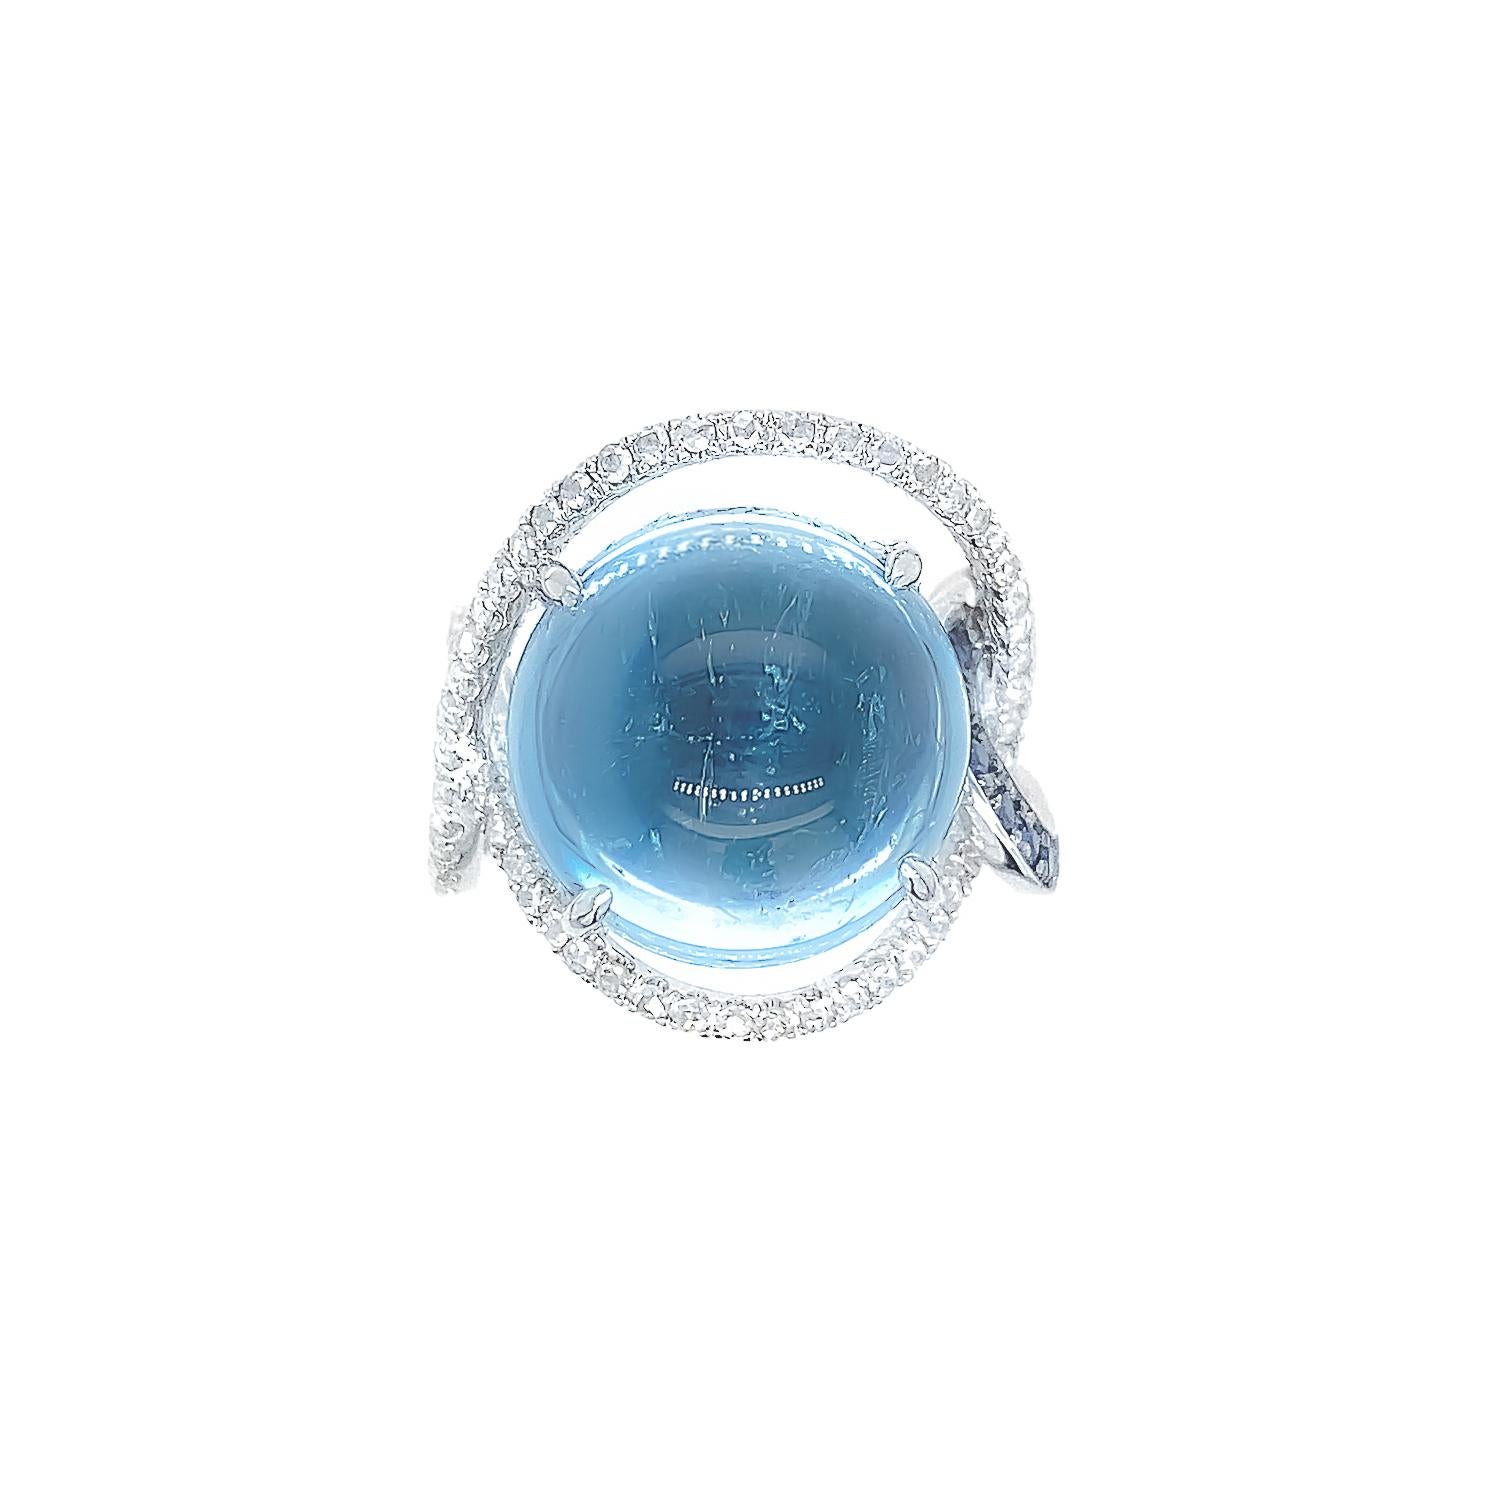 Alll-natural gem-grade, transparent Aquamarine with unique 'birthmarks' within its globe-like form, set in a flowing and lively silhouette with 18K black and white gold. Set by the House of Dilys' skilled craftsmen, trained and attuned to the